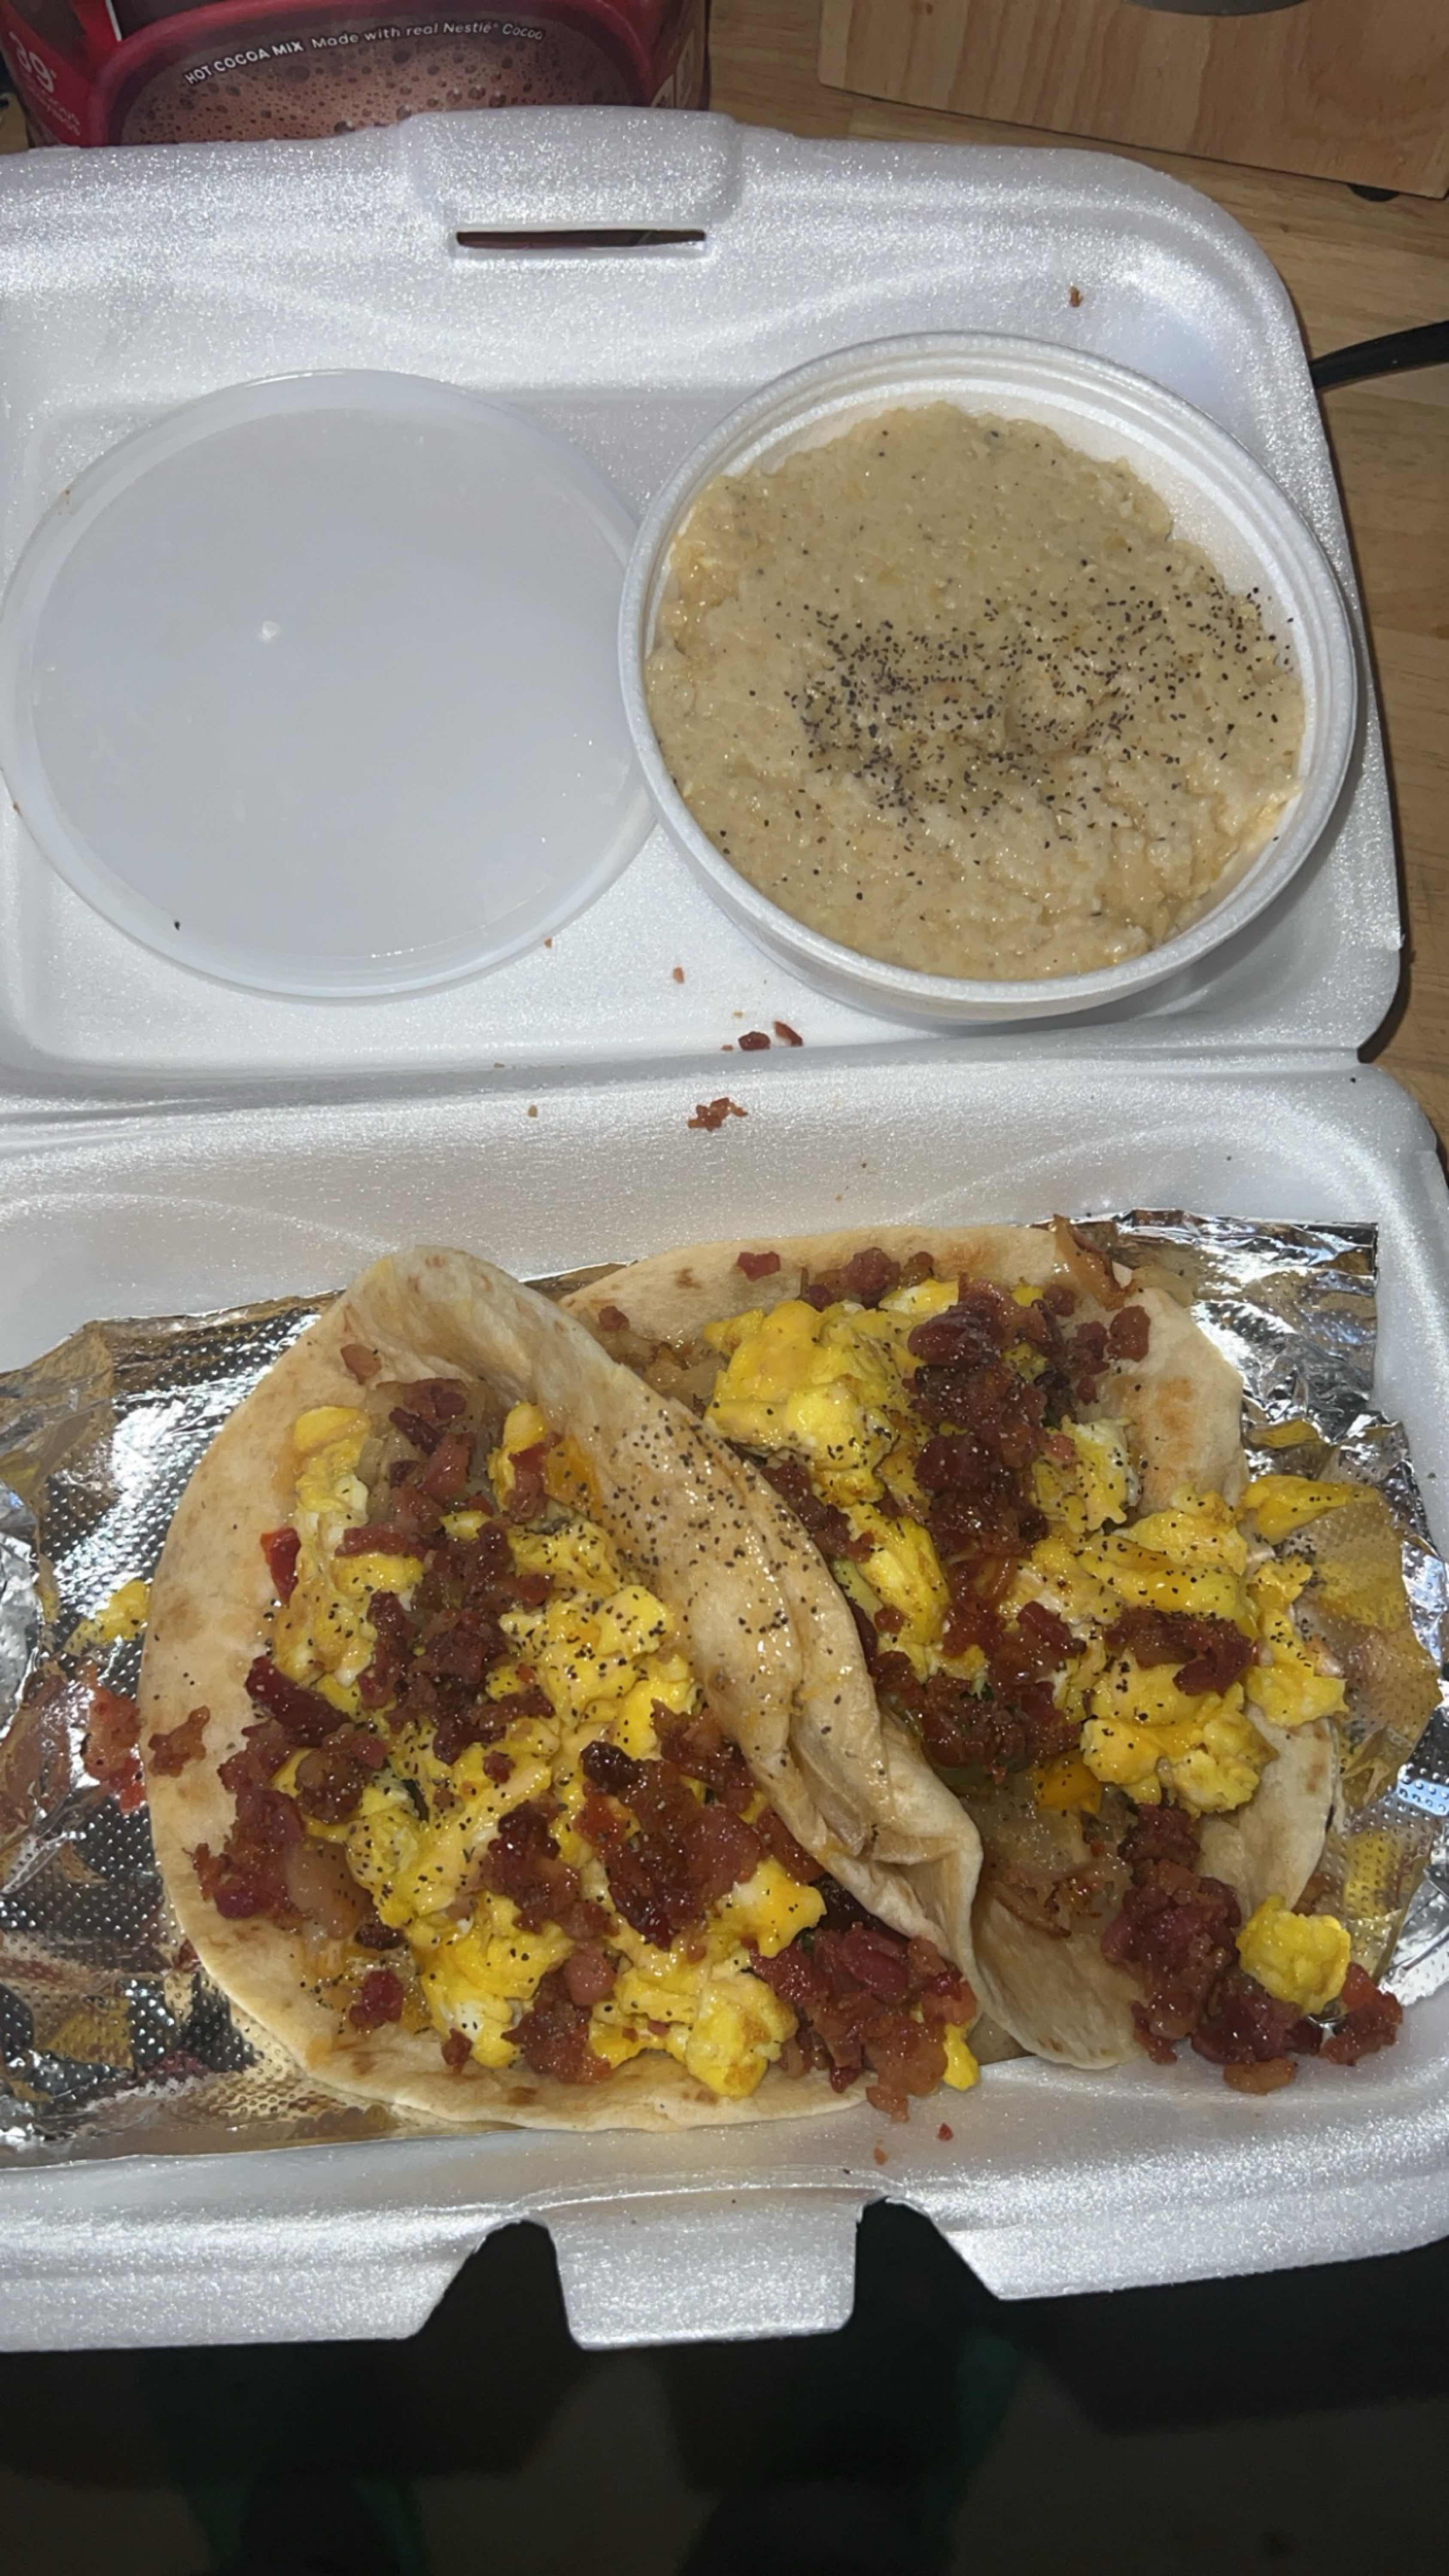 Order THE BREAKFAST BOX - Akron, OH Menu Delivery [Menu & Prices